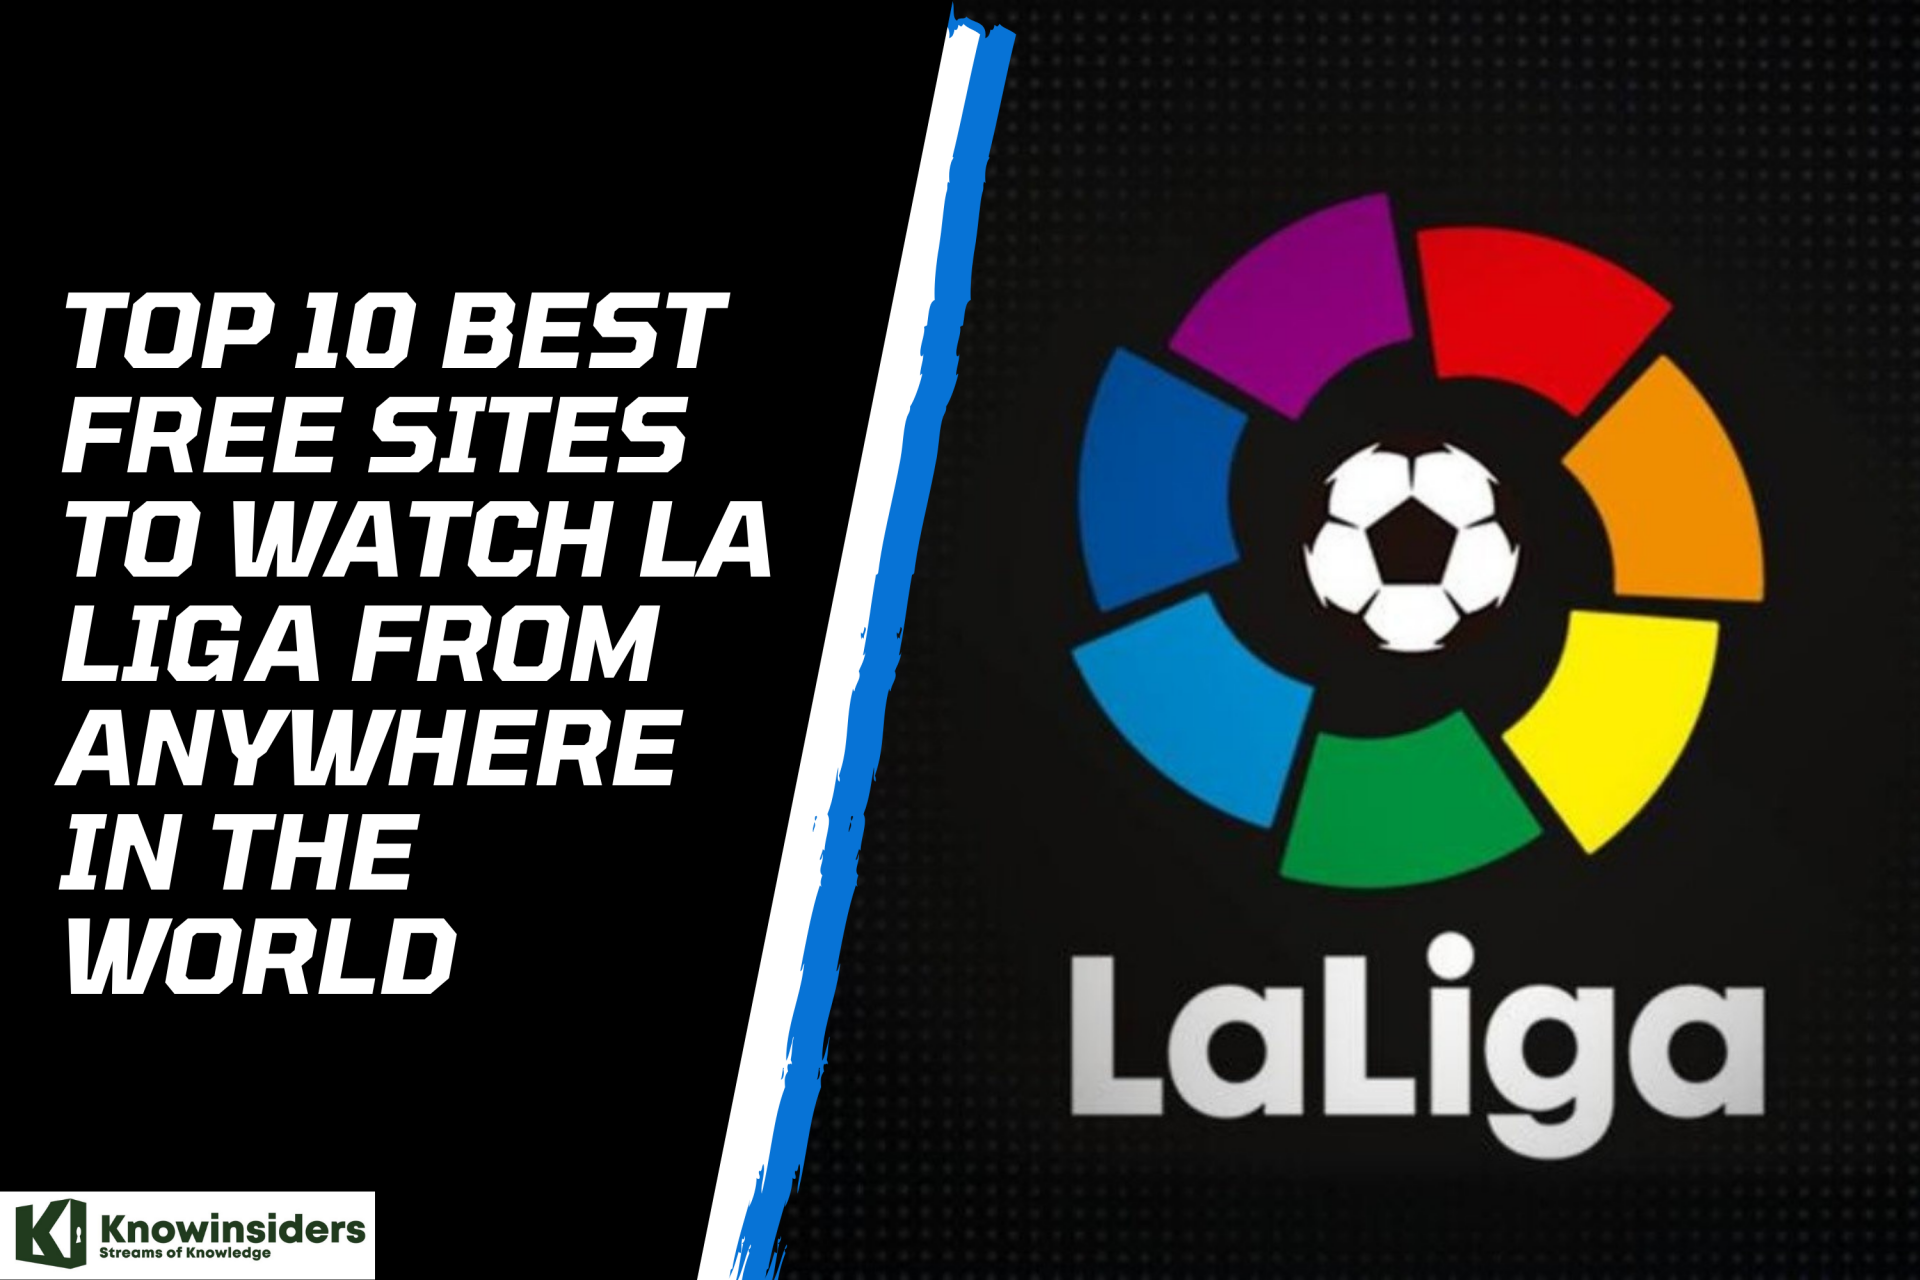 Top 10 Best Free Sites To Watch La Liga From Anywhere In The World